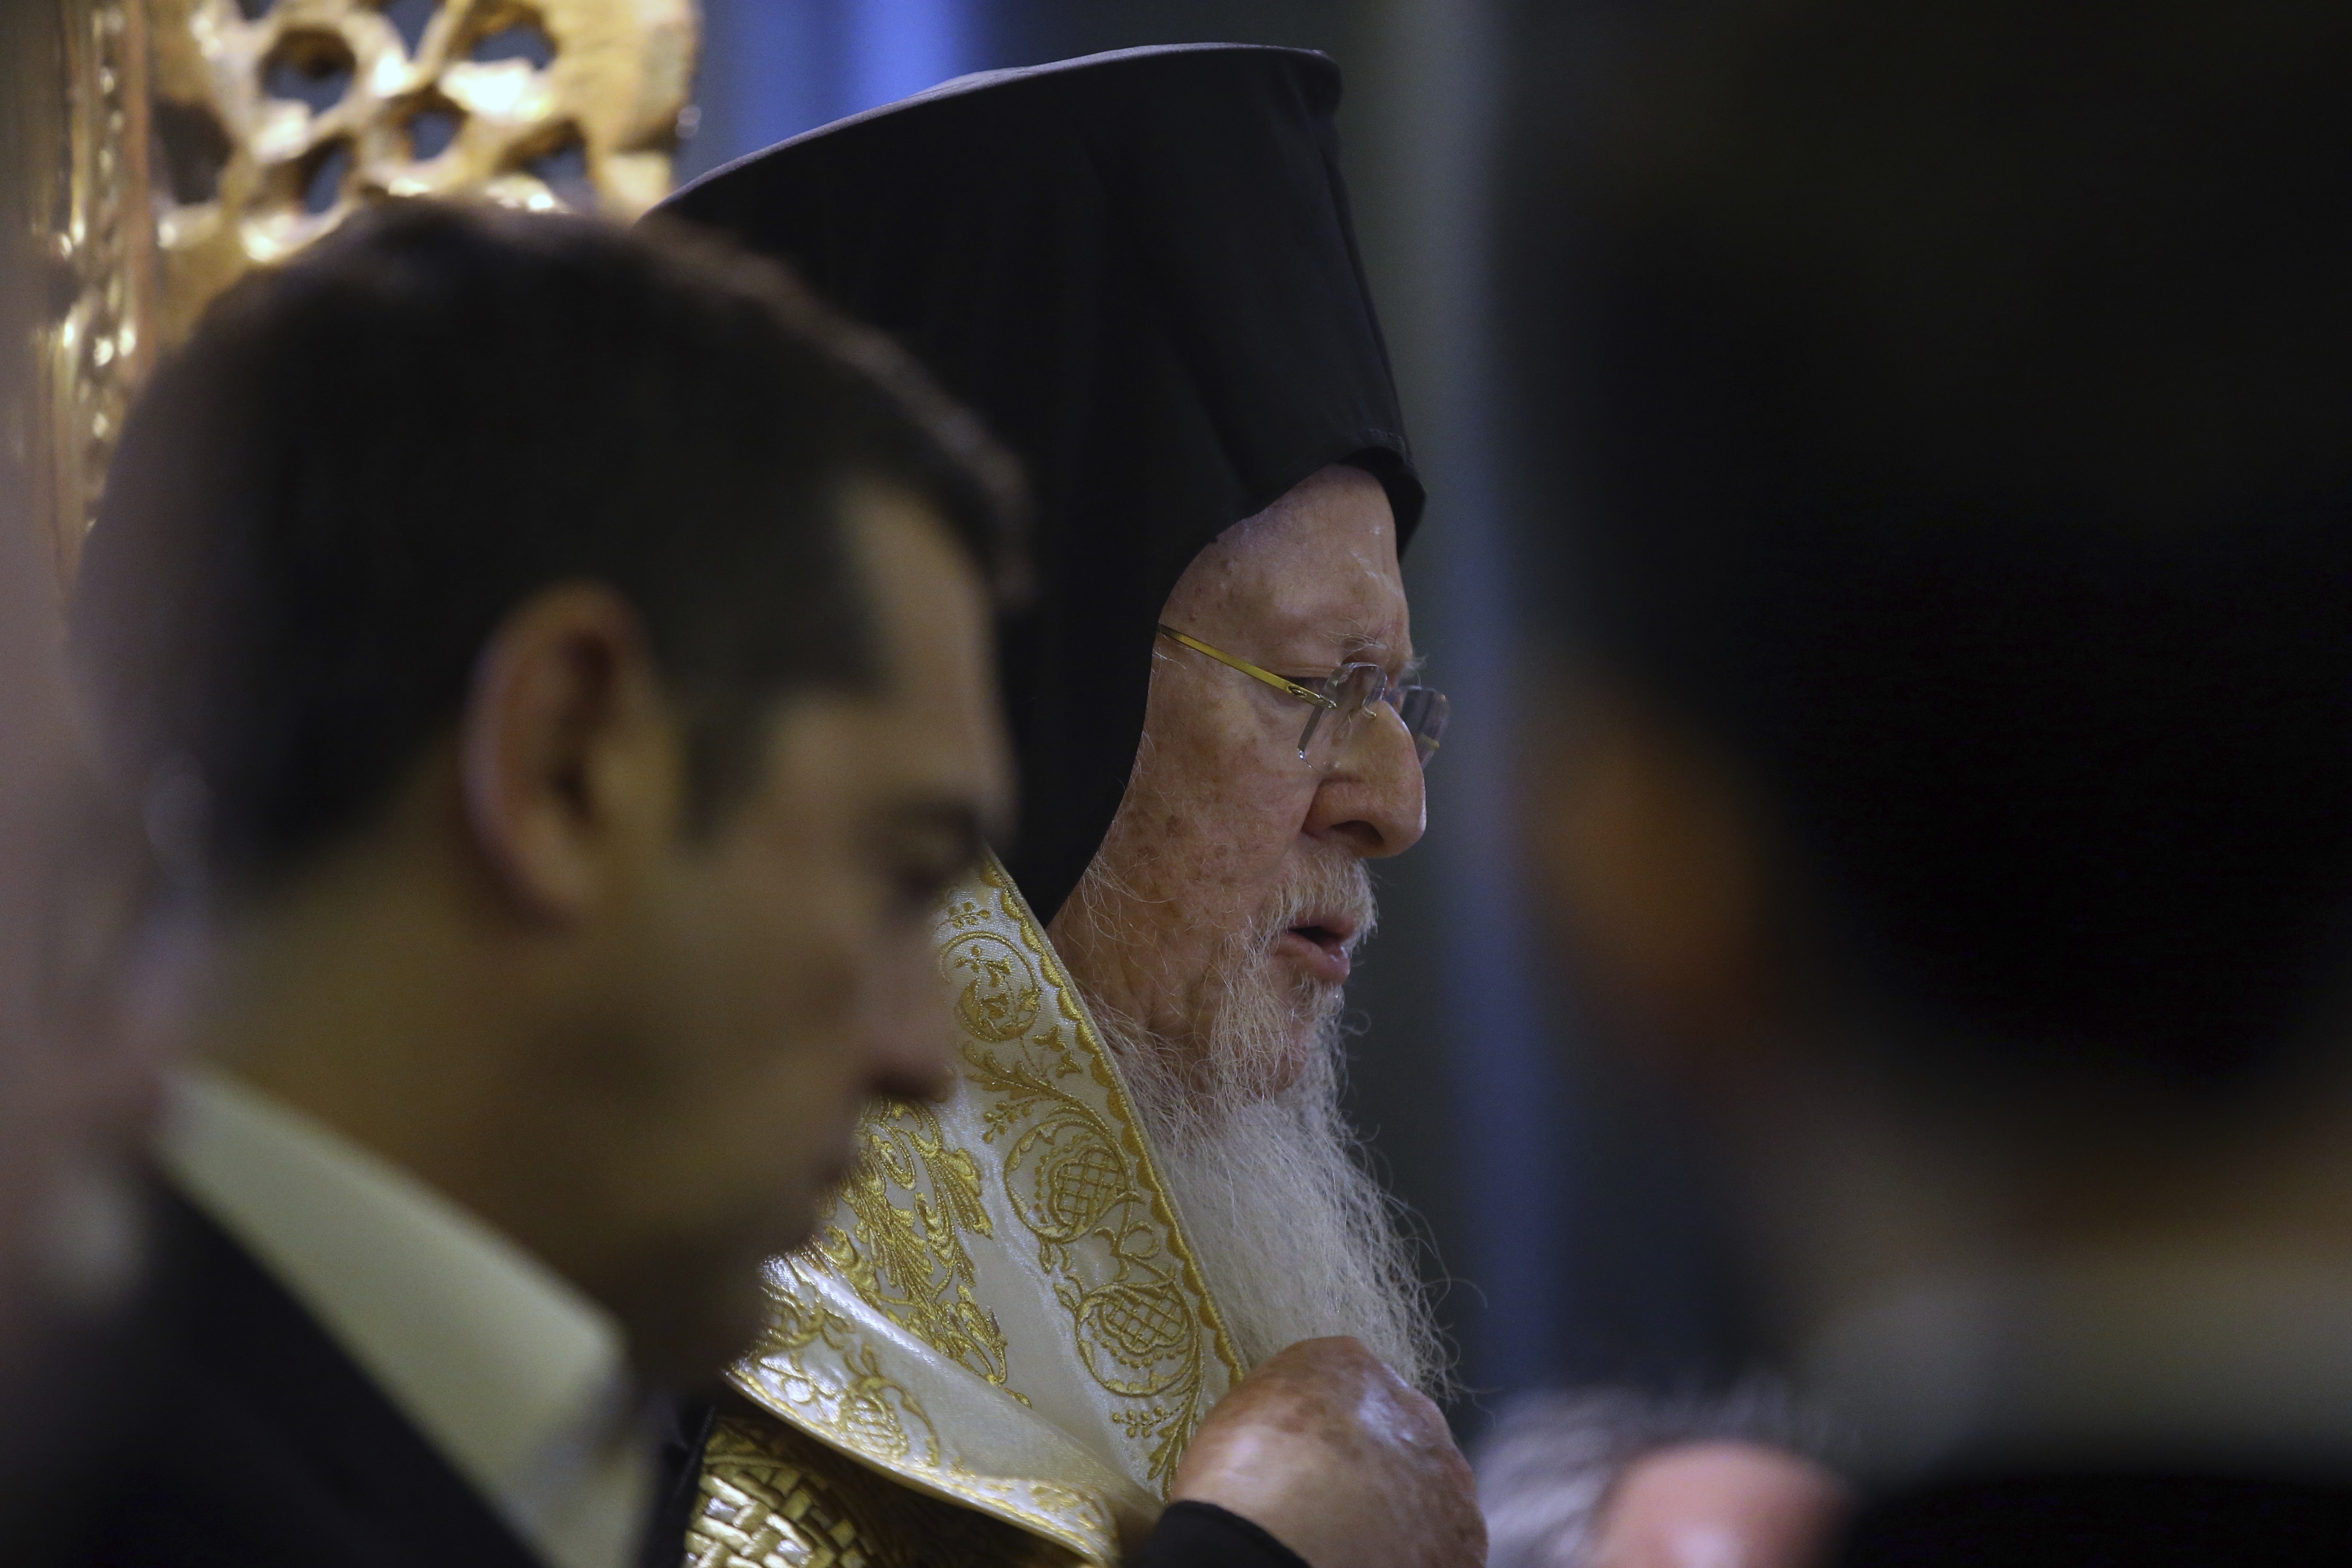 Ecumenical Patriarch Bartholomew I, right, and Greece's Prime Minister Alexis Tsipras attend a church service during their visit at the Theological School of Halki, in Heybeli Island, near Istanbul, Wednesday, Feb. 6, 2019. The president of Turkey and the prime minister of Greece agreed Tuesday on the need to keep 